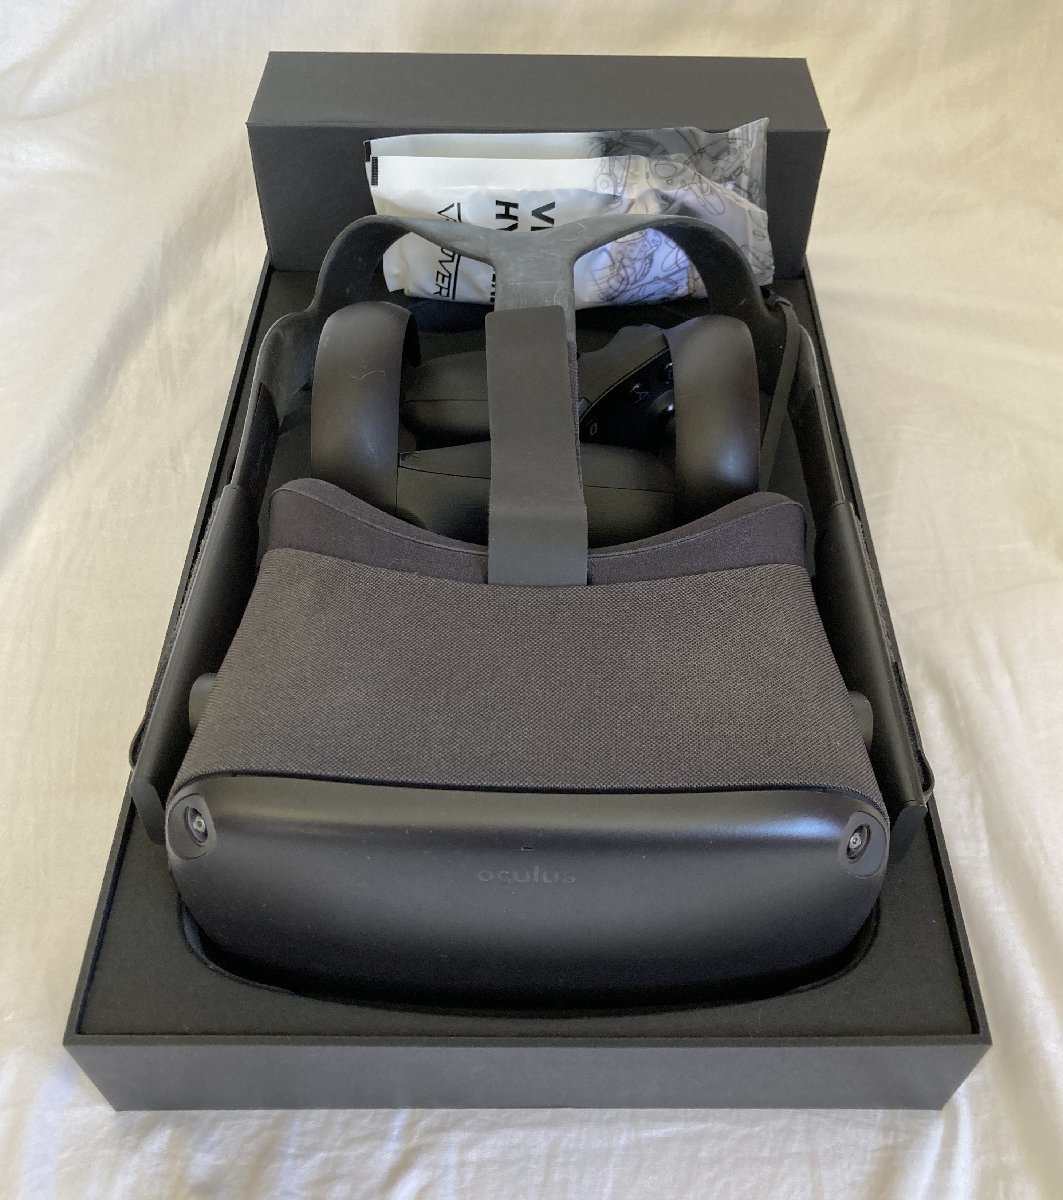 *OCULUS QUEST 301-00170-01 64GB single unit type VR game system okyulas Quest *VR game body ...... seems to be ... thing .14,991 jpy 